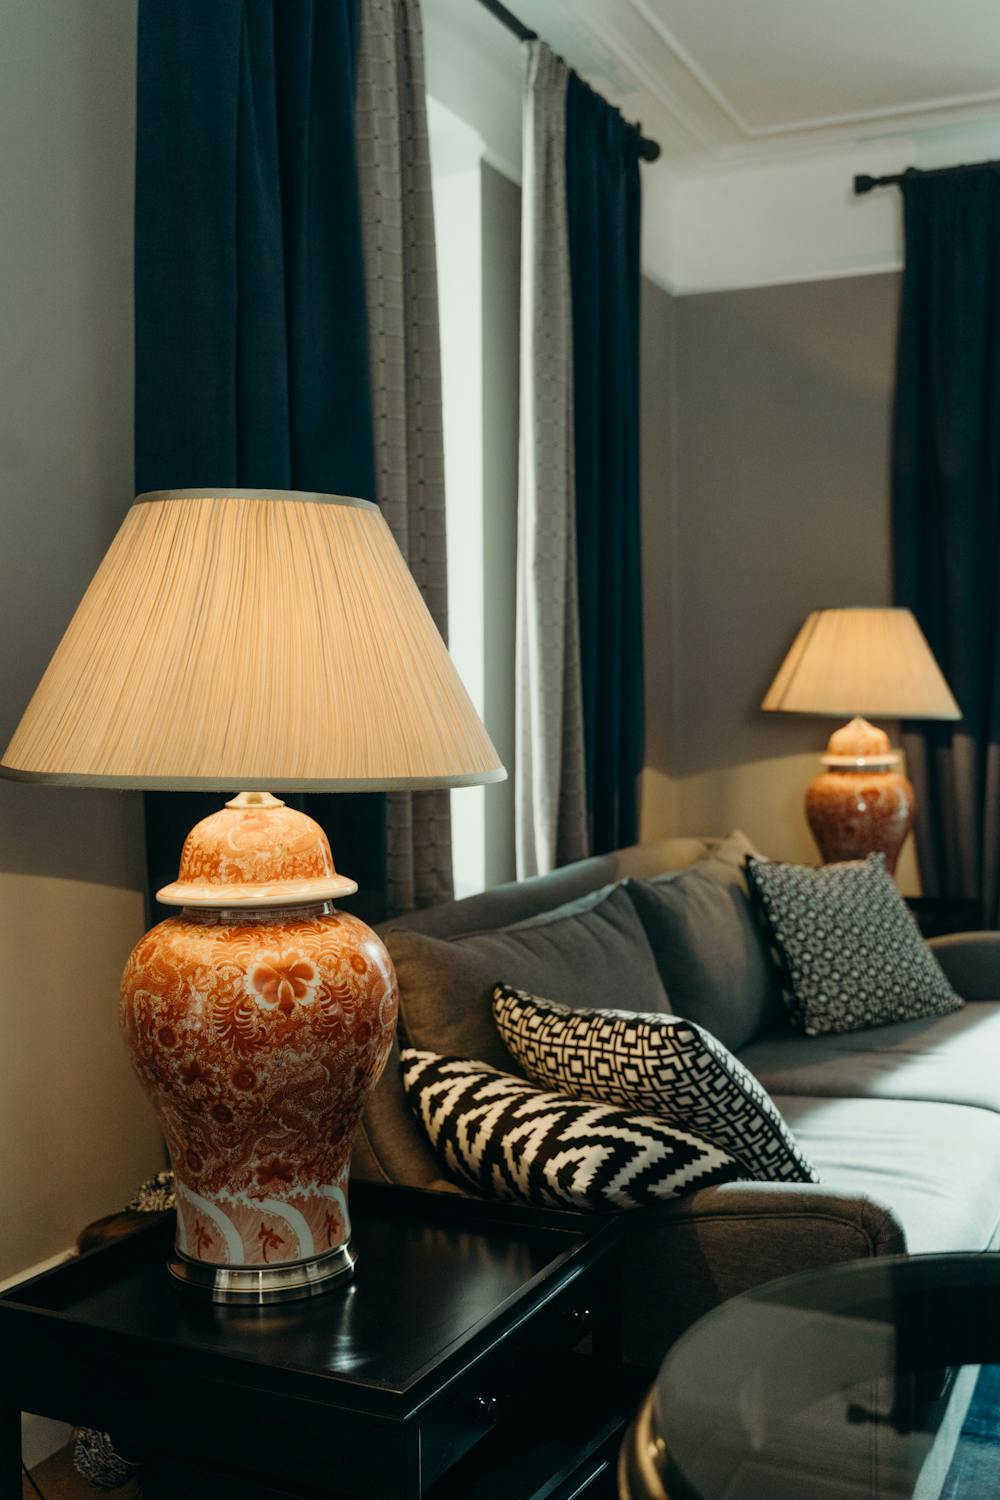 decorate your home by Focusing on curtains and lamps